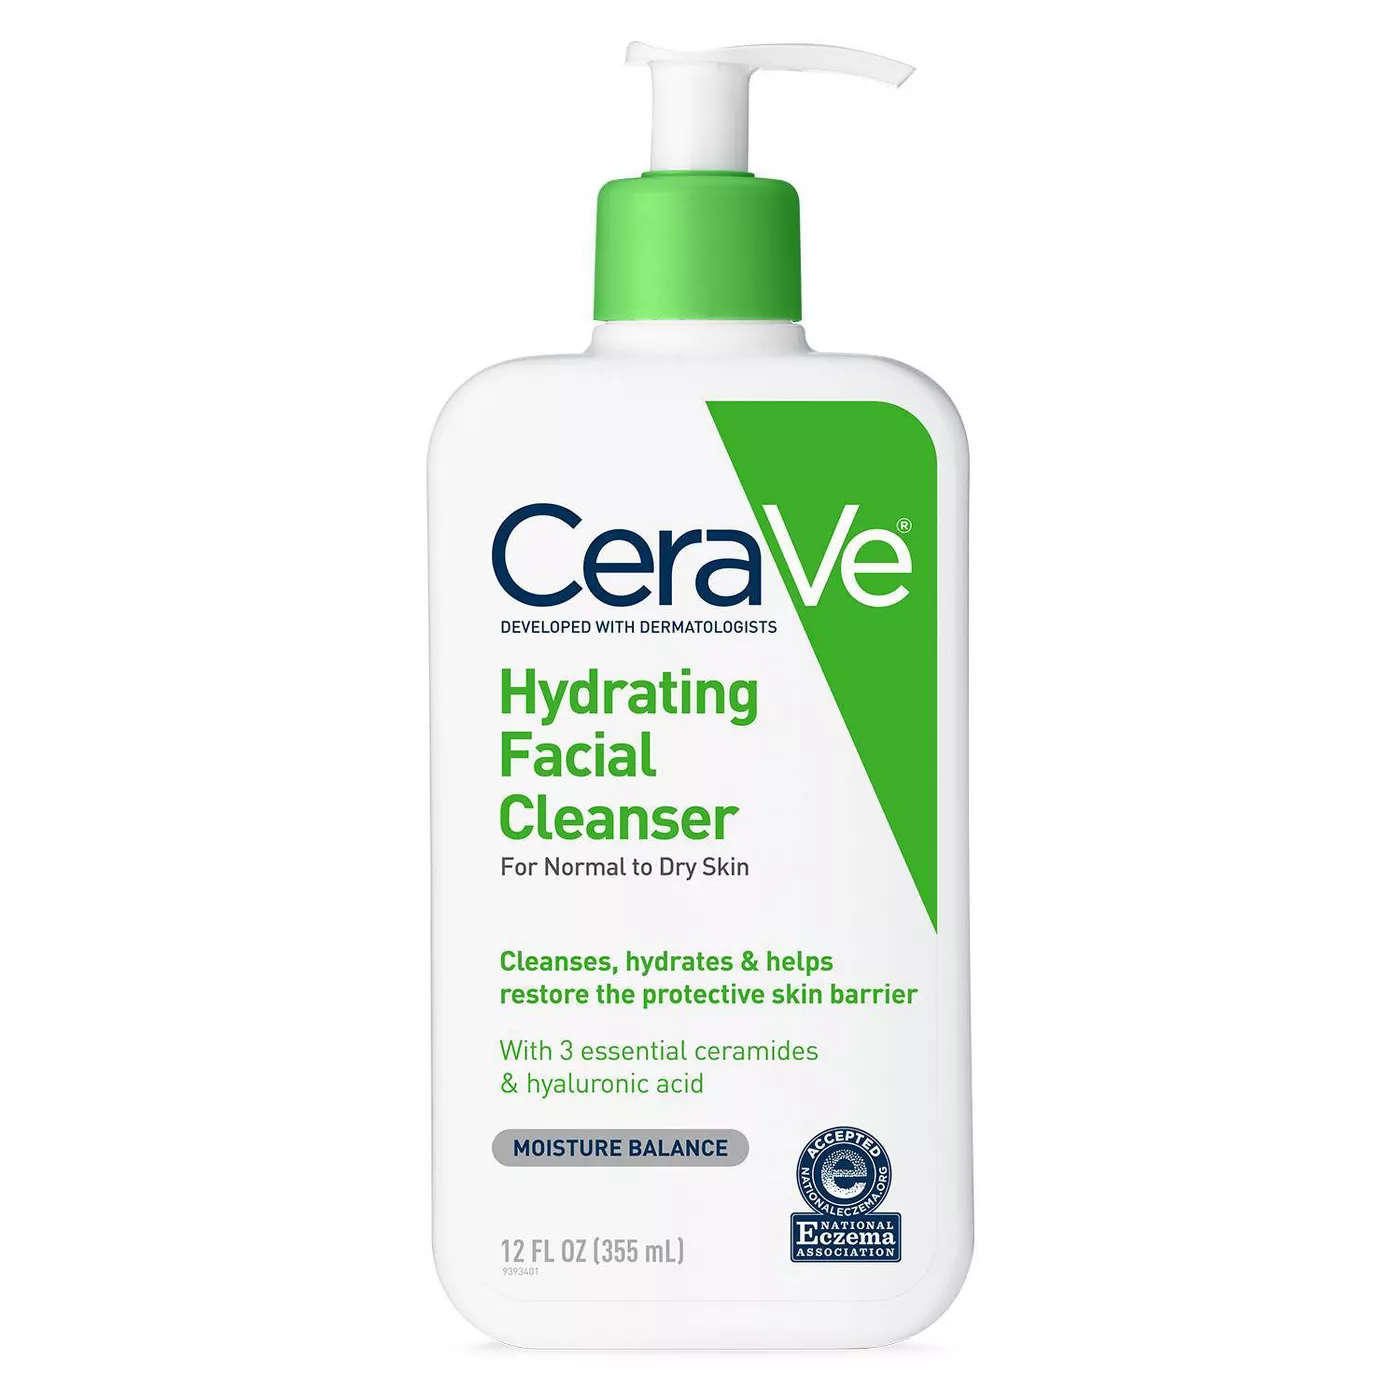 CeraVe Hydrating Facial Cleanser For Normal To Dry Skin Fragrance Free - 12oz - image 1 of 4